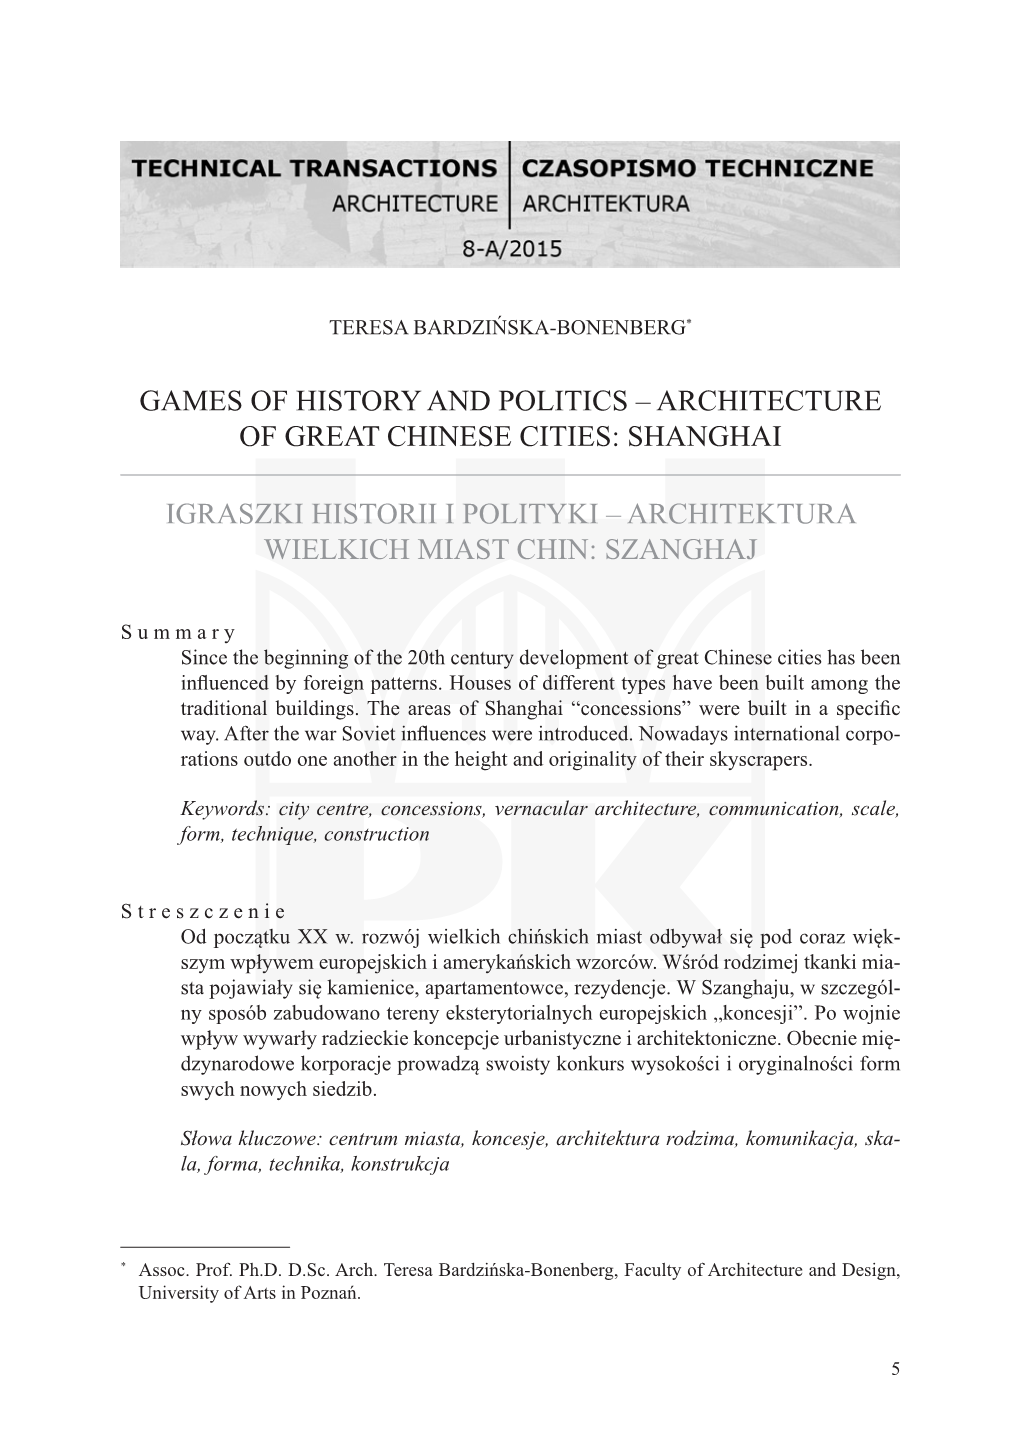 Games of History and Politics–Architecture of Great Chinese